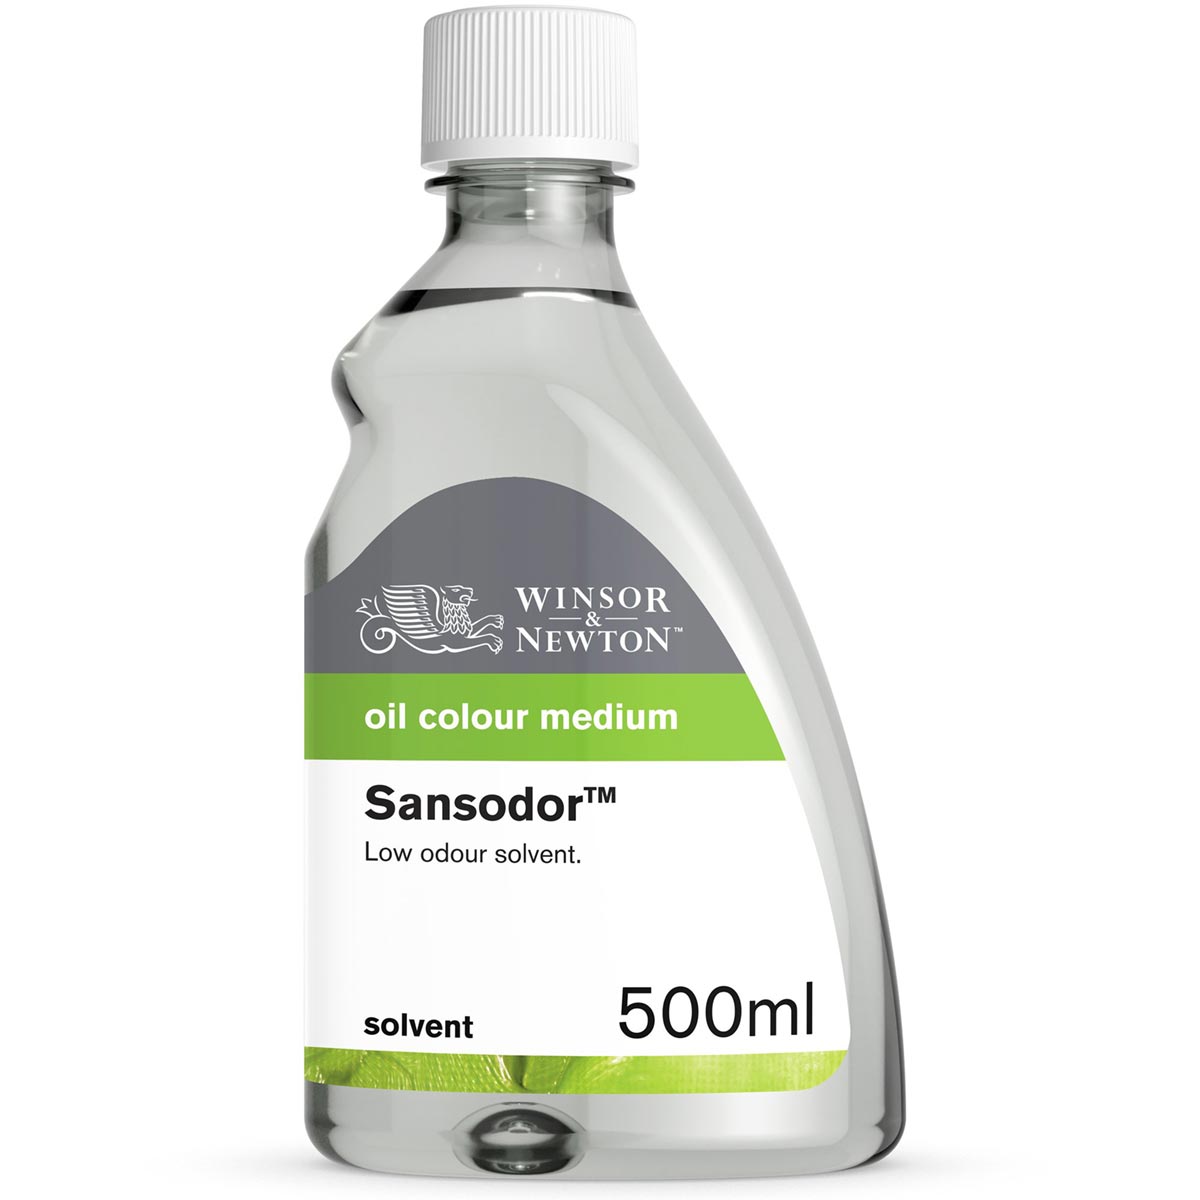 Winsor and Newton - Sansodor Low Odour Solvent Cleaner - 500ml